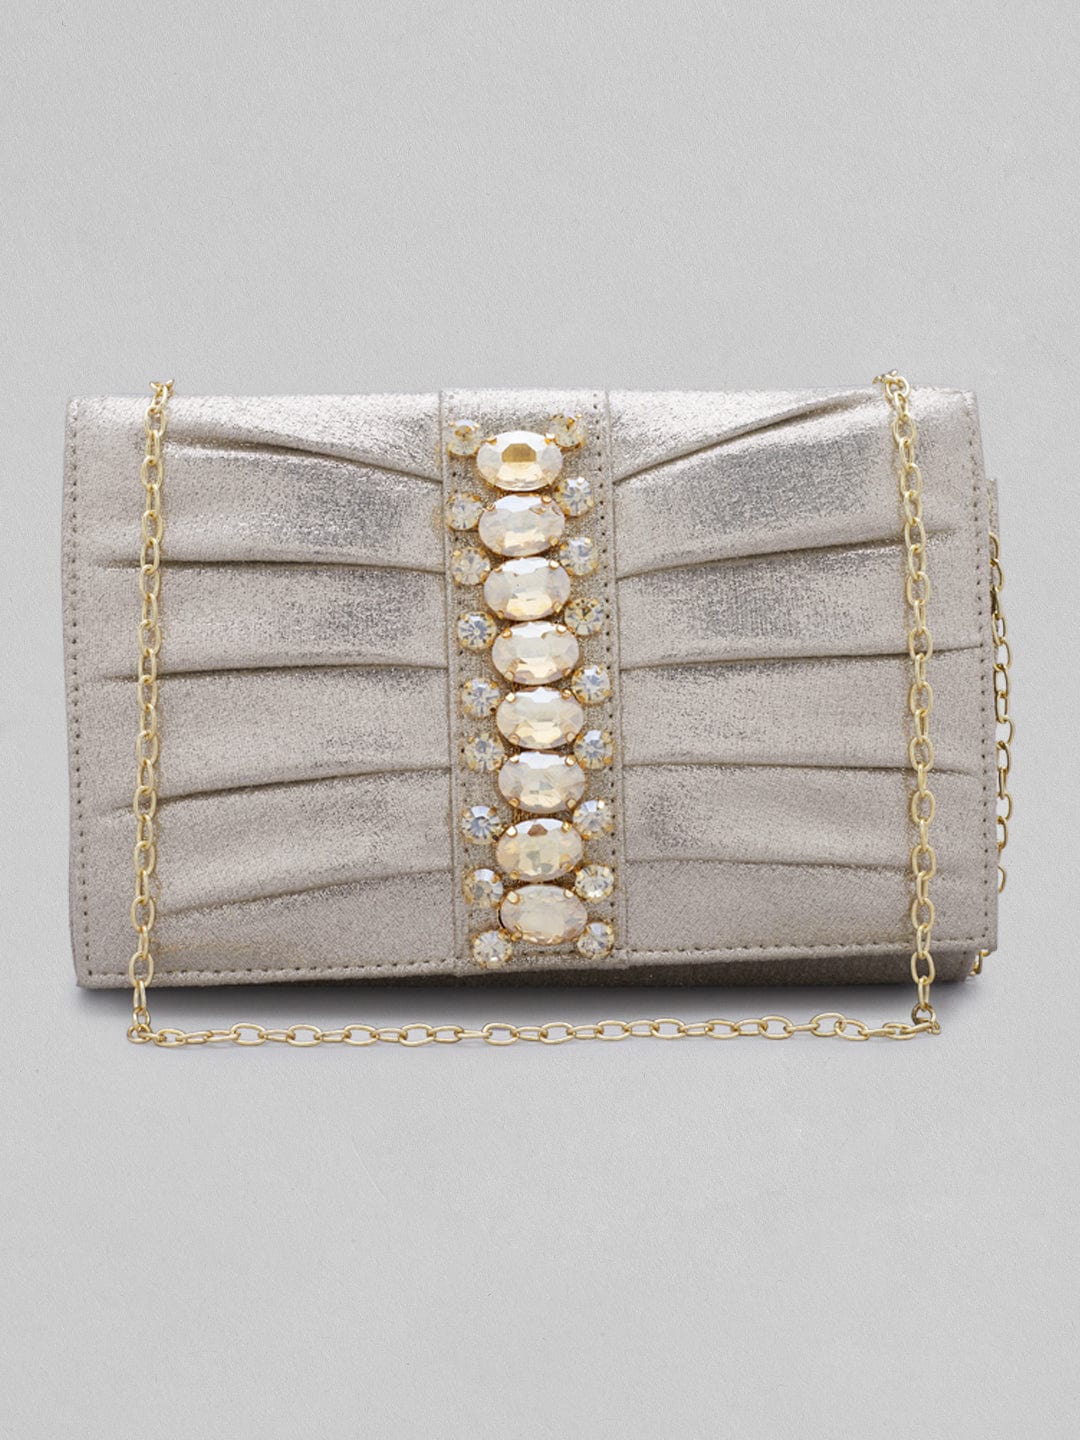 Rubans Silver Coloured Clutch Bag With Studded Stone Design Handbag & Wallet Accessories